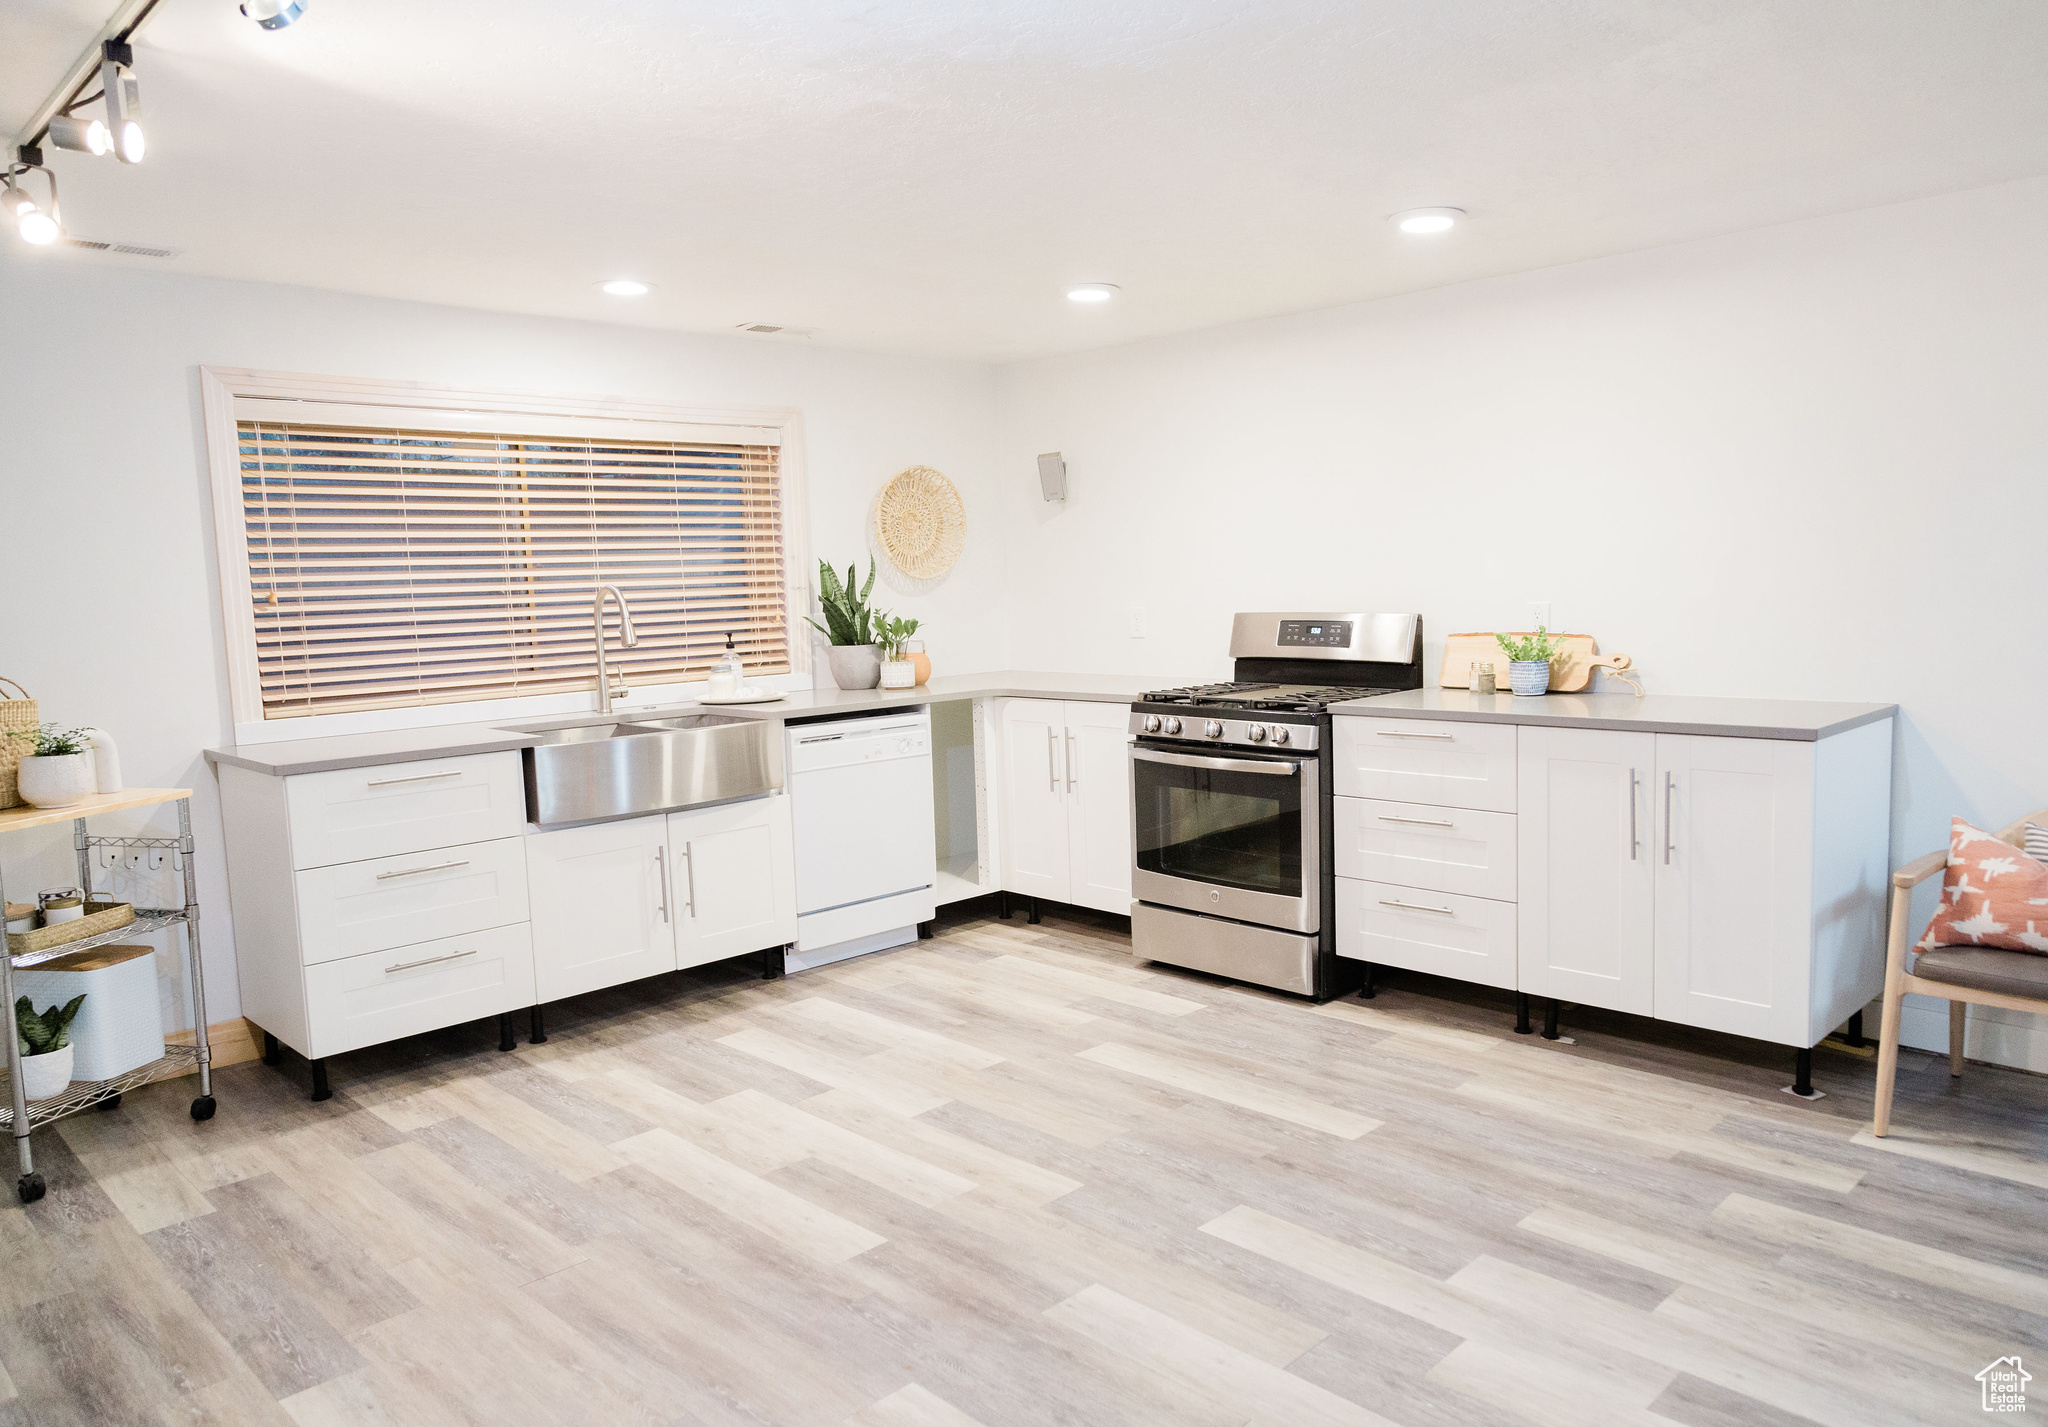 Basement kitchen featuring sink, stainless steel gas range oven, dishwasher, white cabinetry, and light wood-type flooring